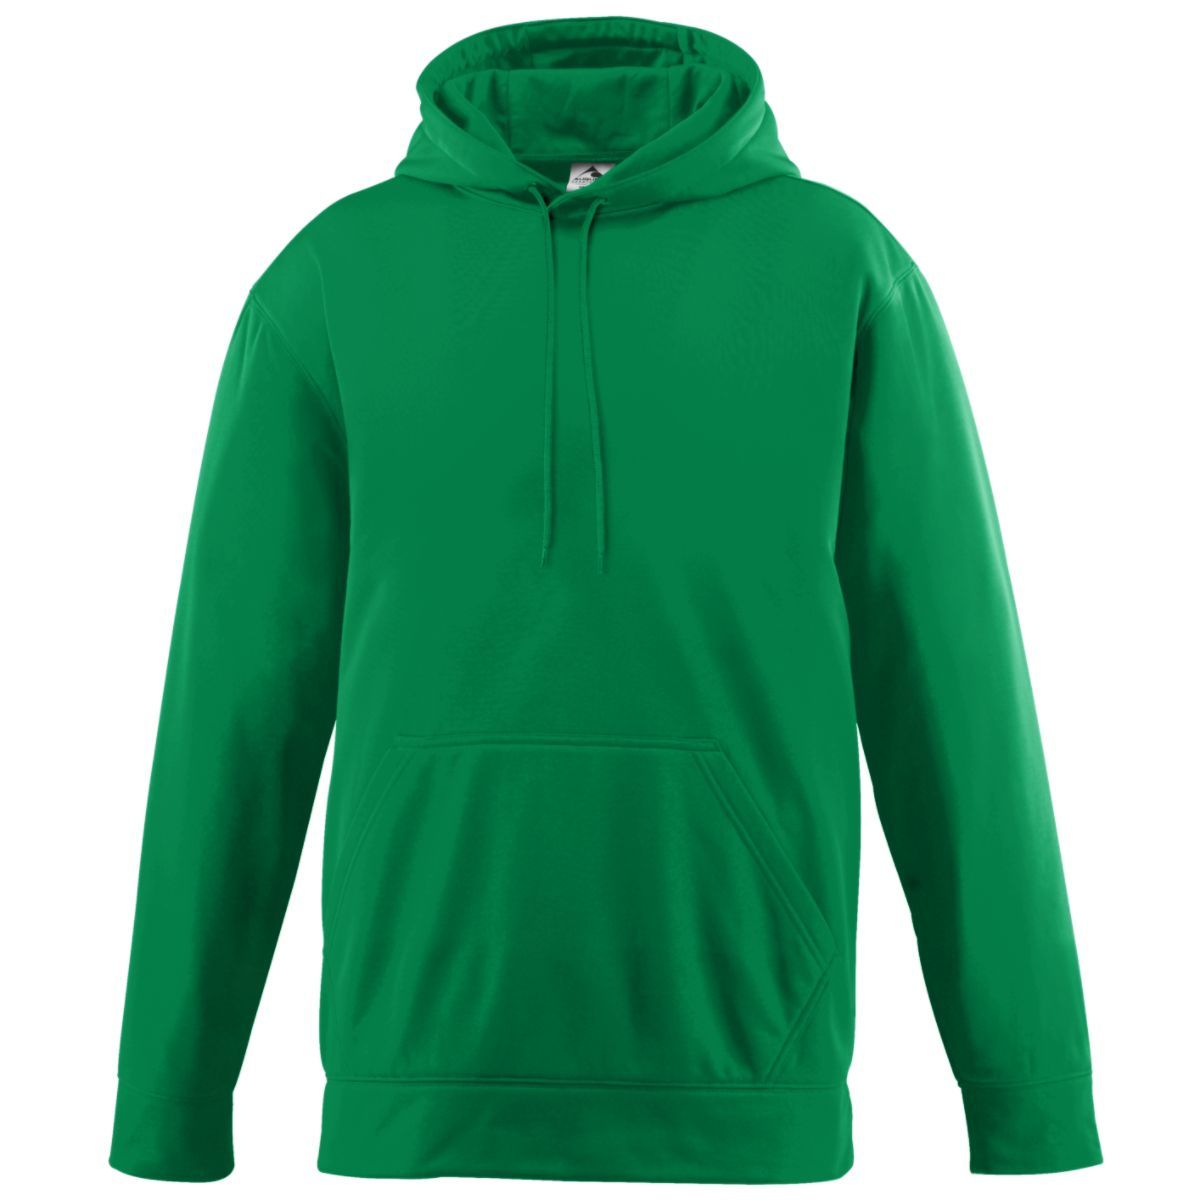 Augusta Sportswear Youth Wicking  Fleece Hoodie in Kelly  -Part of the Youth, Youth-Sweatshirt, Augusta-Products, Outerwear product lines at KanaleyCreations.com